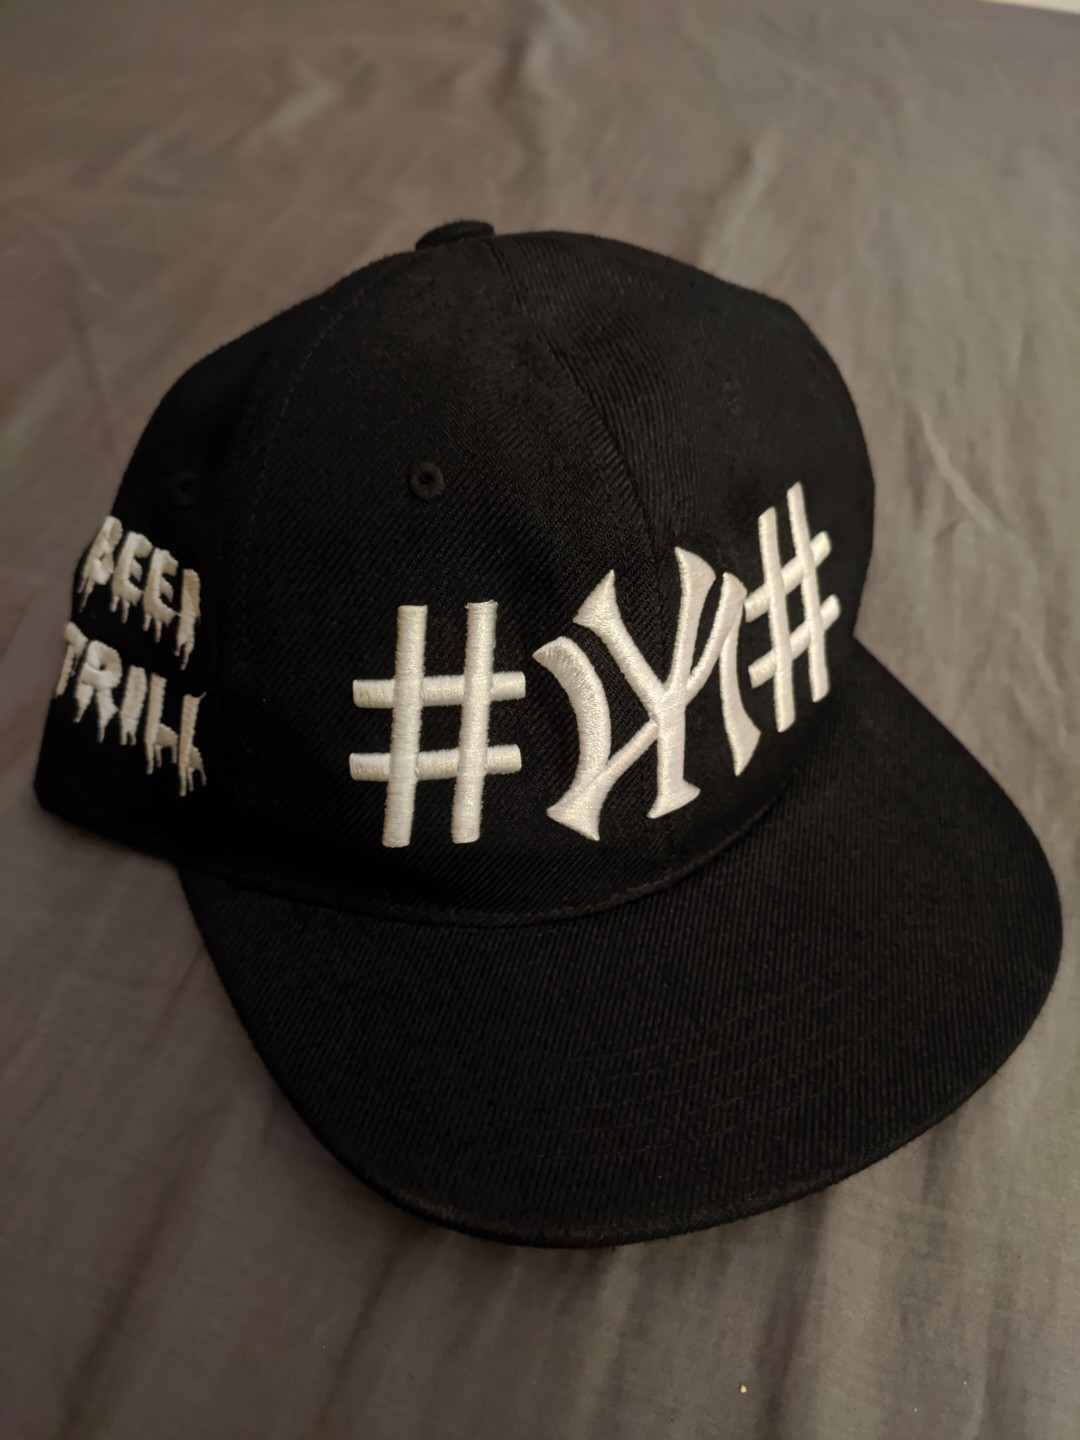 Been Trill x 40oz NYC Snapback Cap, Men's Fashion, Watches ...